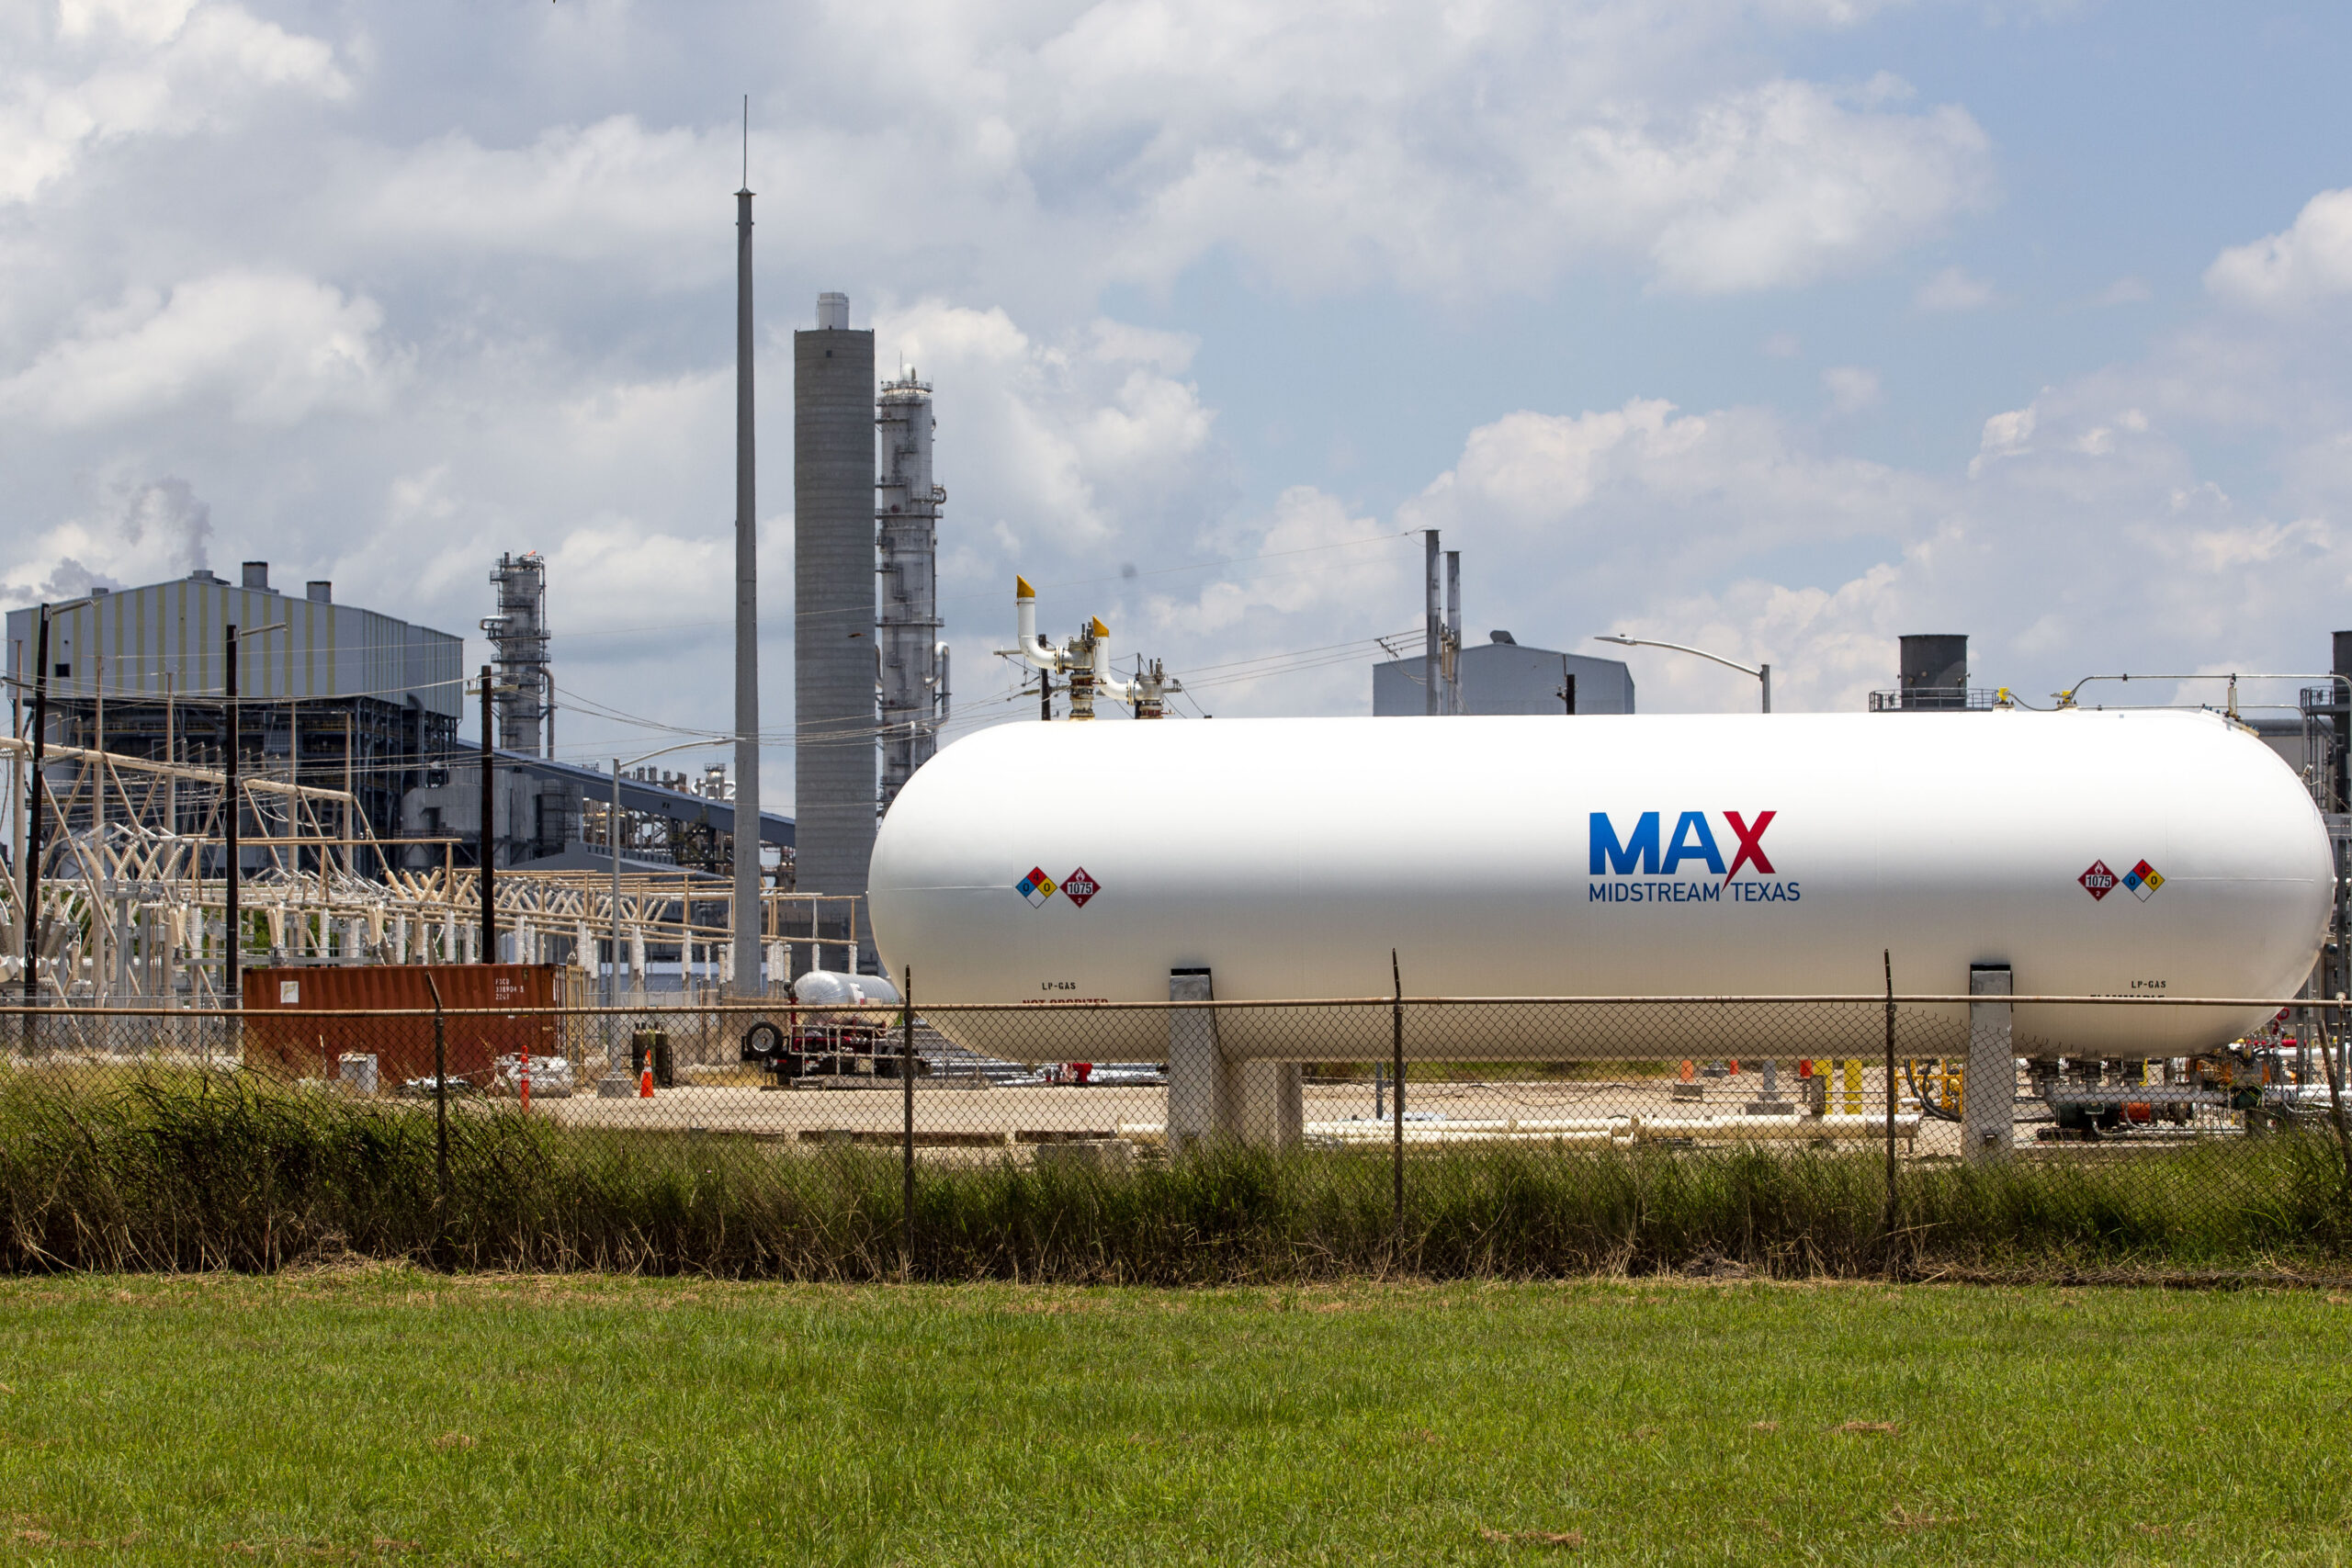 A branded storage tank can be seen outside the Max Midstream oil and gas refinery in Port Arthur, Texas.